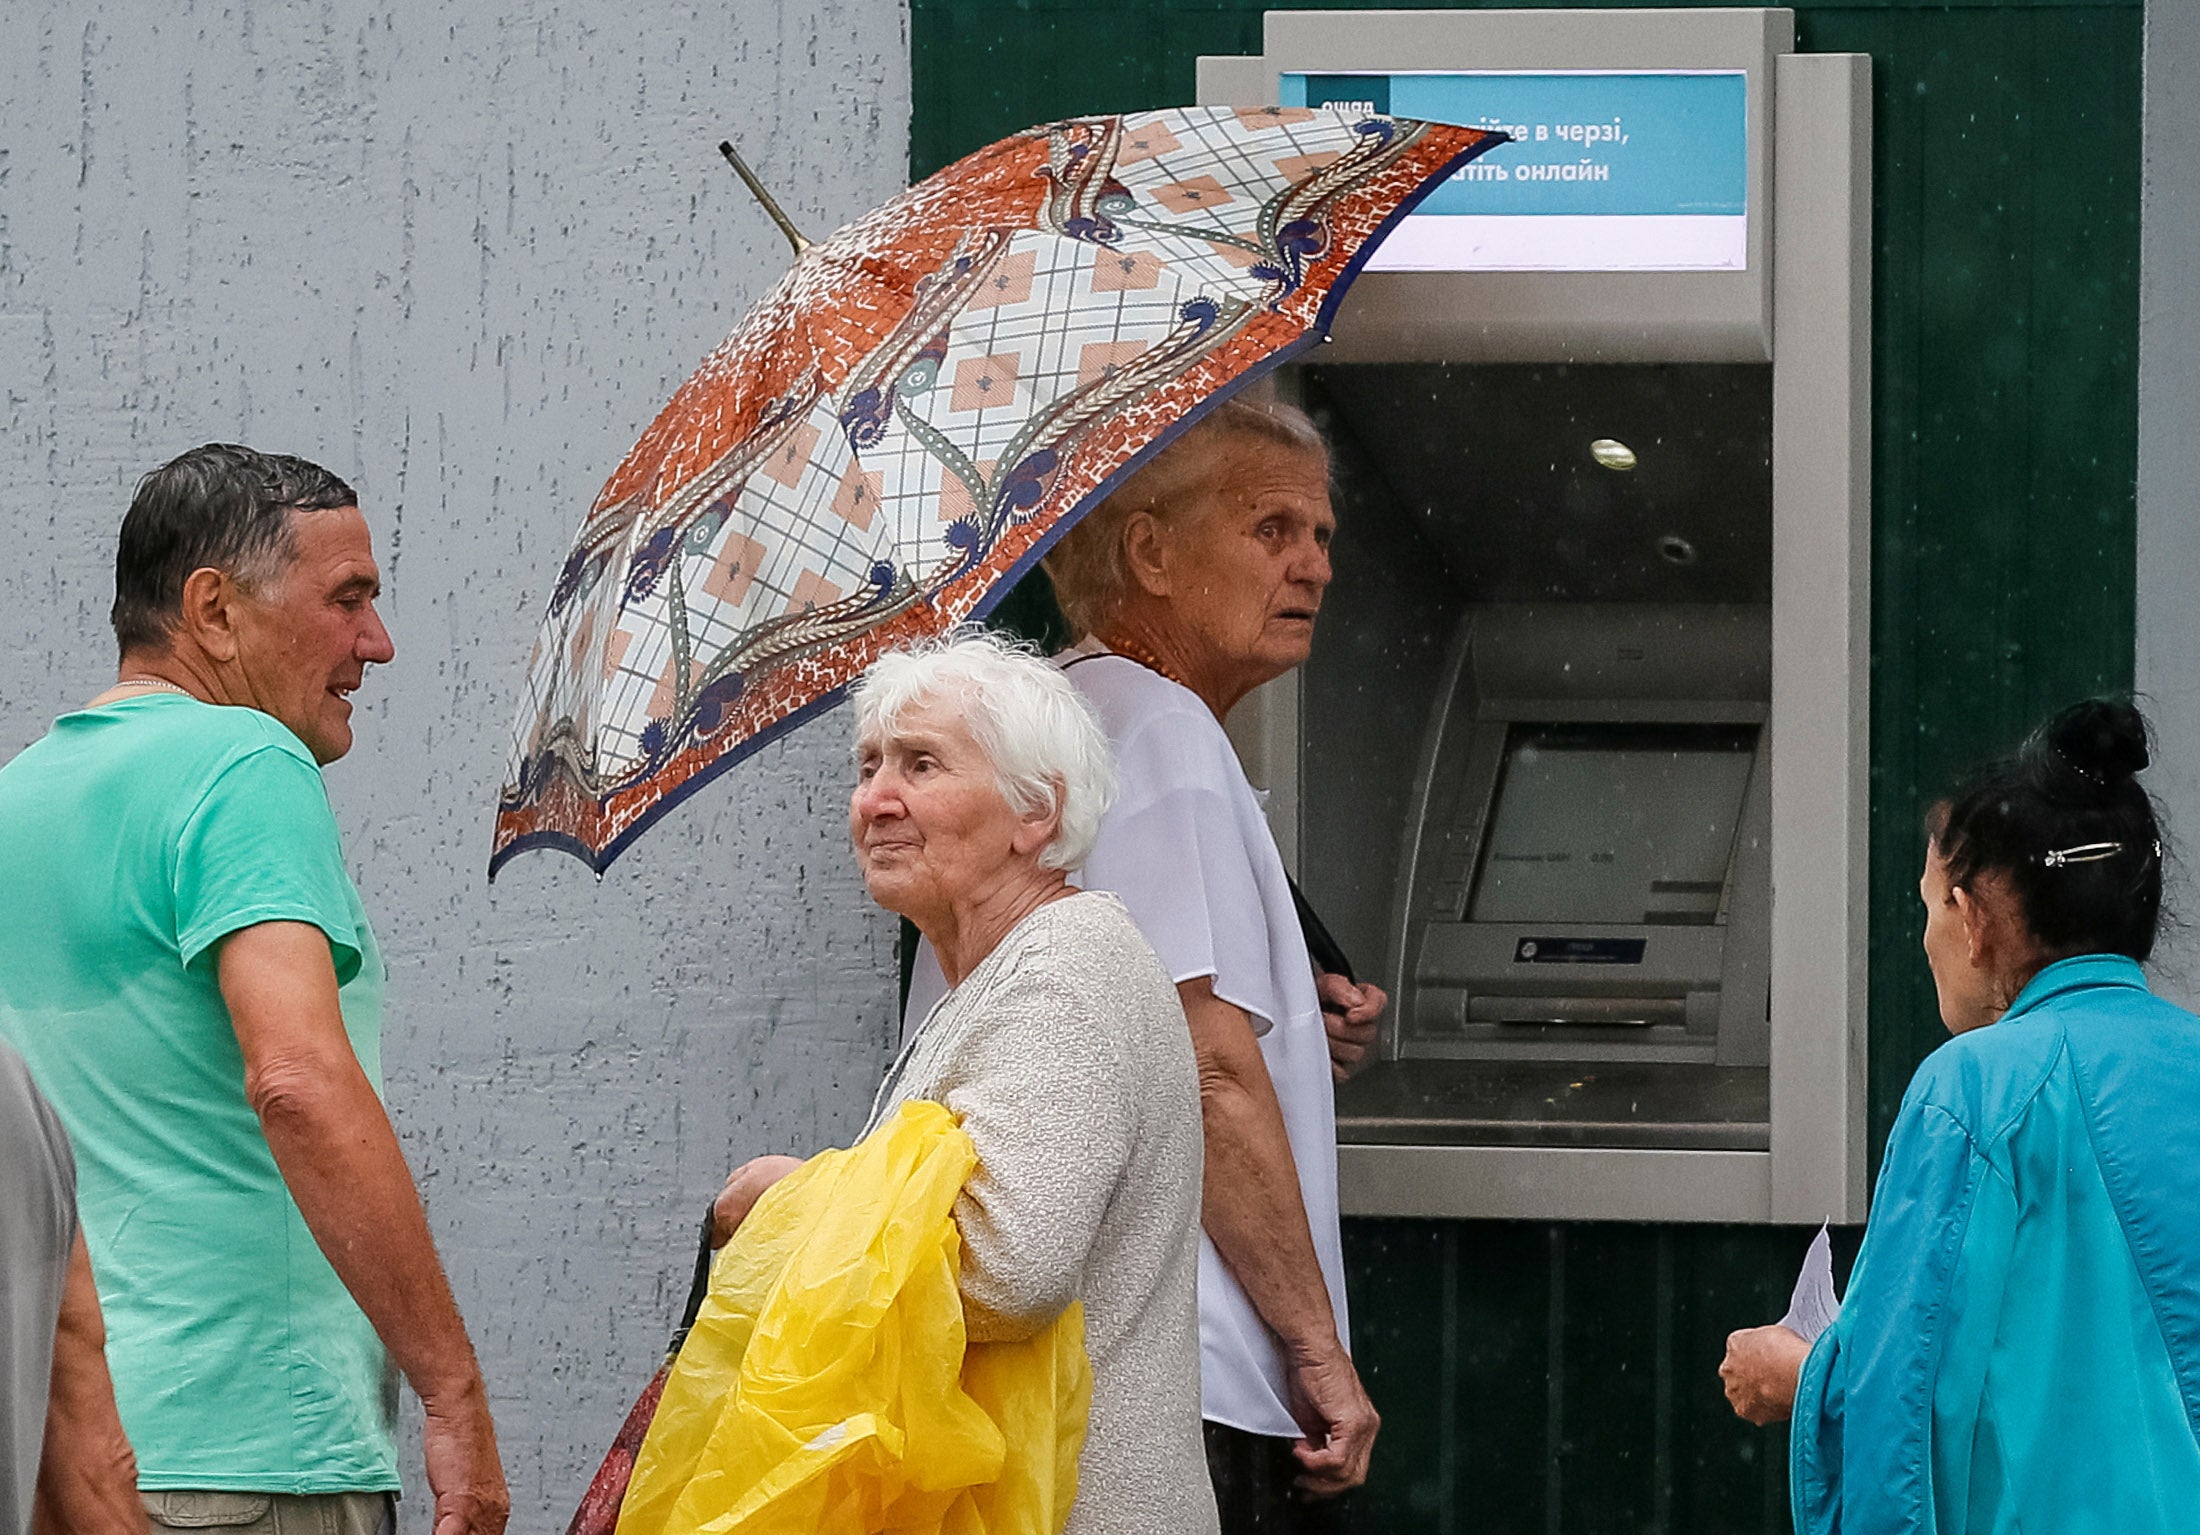 Ukraine: People with Limited Mobility Can’t Access Pensions